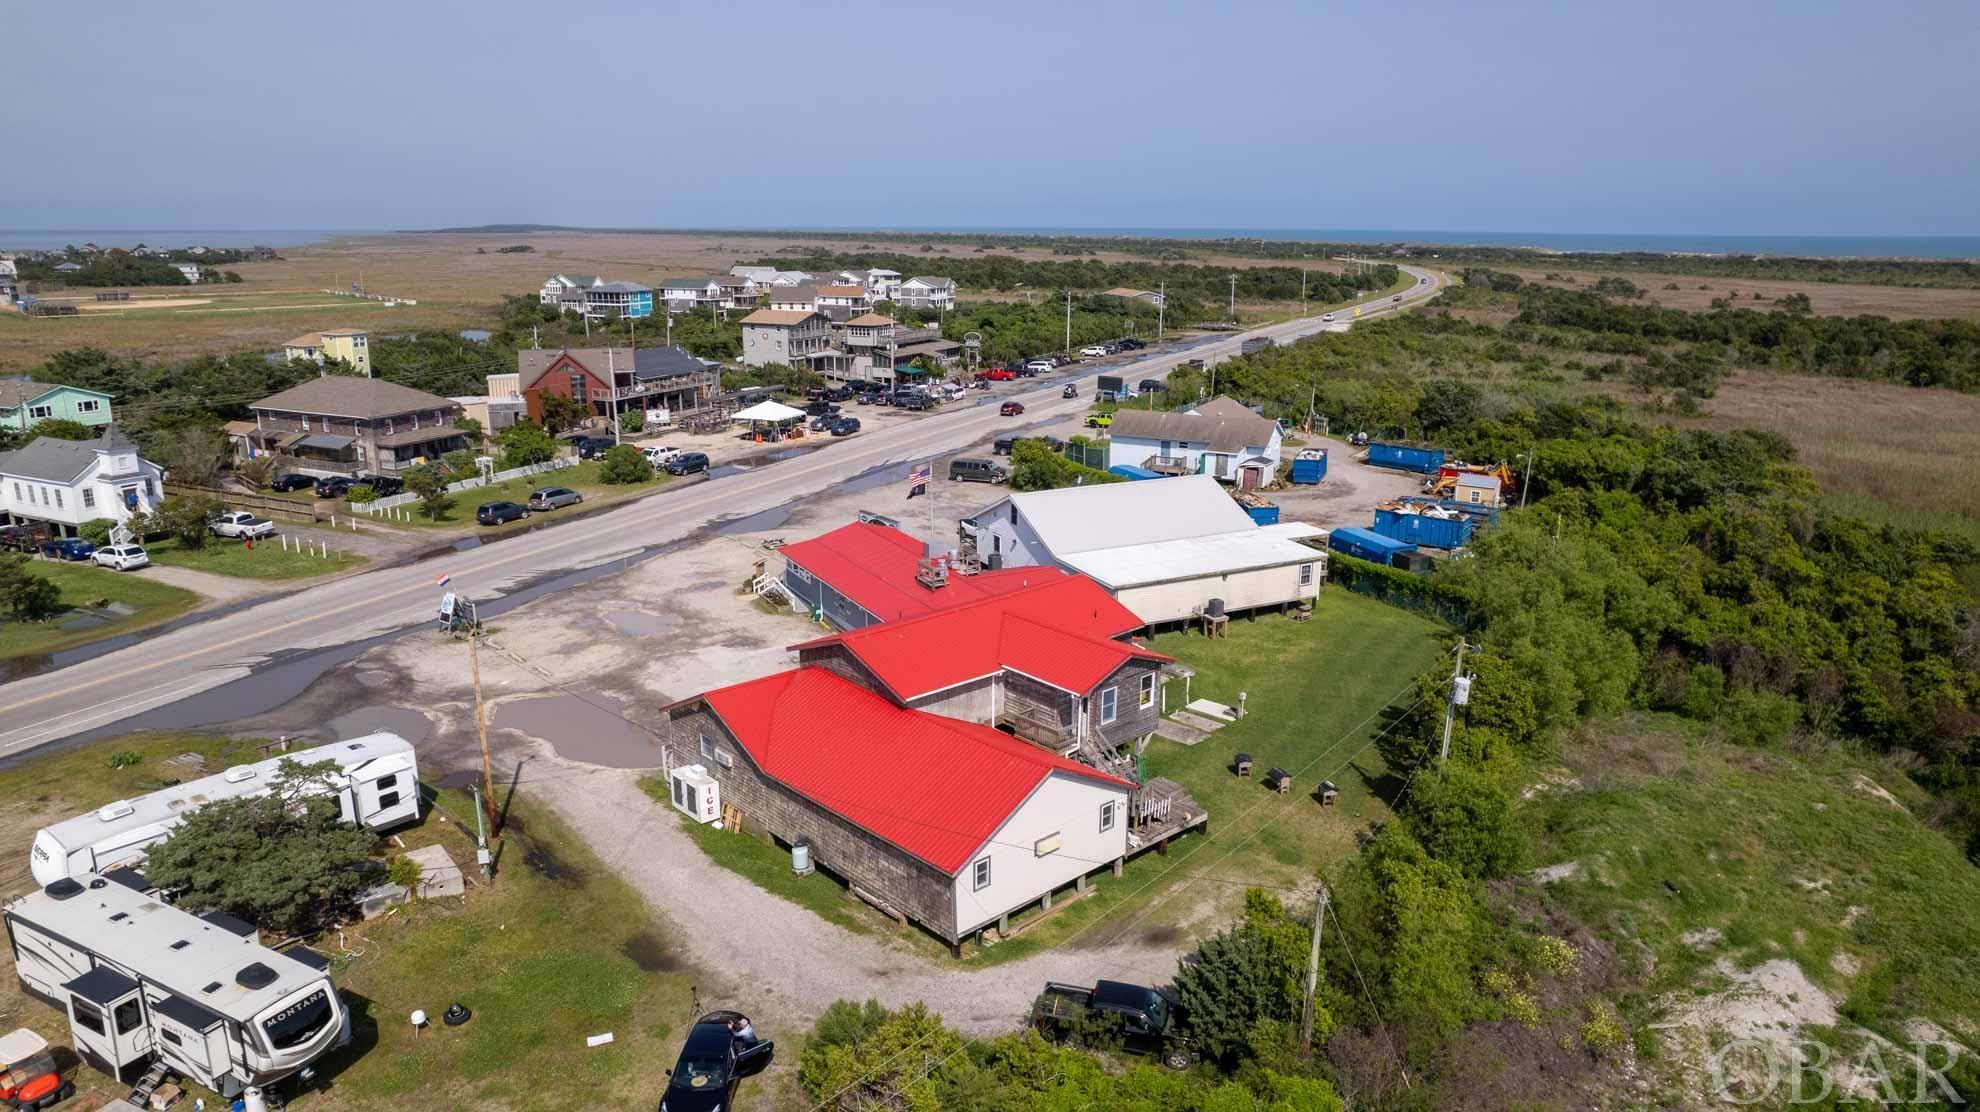 ESTABLISHED LONG TERM TACKLE SHOP AND APARTMENT Tradewinds Tackle has been the "Go To" tackle shop for decades. Conveniently located at the entrance to Ocracoke Village, with ample parking and all the supplies for a successful day of fishing, either by boat or on the beach. With little or no competition, excellent location, and with the long fishing season of Ocracoke, this is a great opportunity for the discerning buyer. The property includes a 1000 sqft apartment on the second level, that could be rented weekly, seasonally, for employees or as owner housing. This is a perfect situation to operate during the season, then spend winter in the Keys. Owner will help train and assist with transition. Jason's Restaurant  and the Tackle Shop have been recorded as condominiums for separation of the two properties and businesses. Taxes are not available yet. Additional information by request.